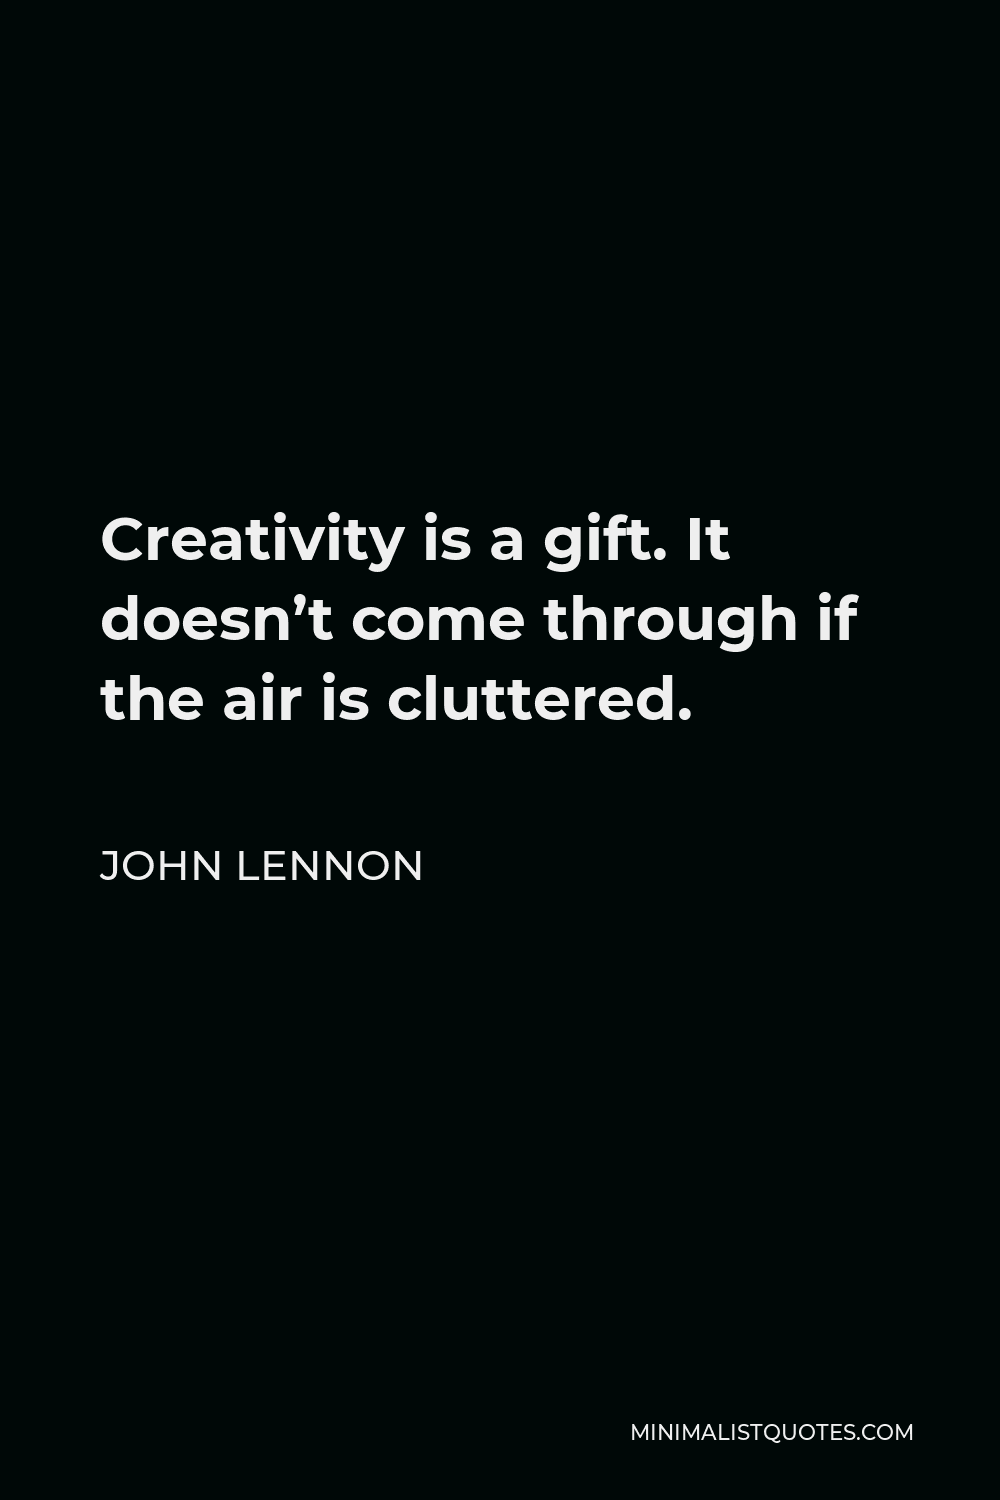 John Lennon Quote - Creativity is a gift. It doesn’t come through if the air is cluttered.